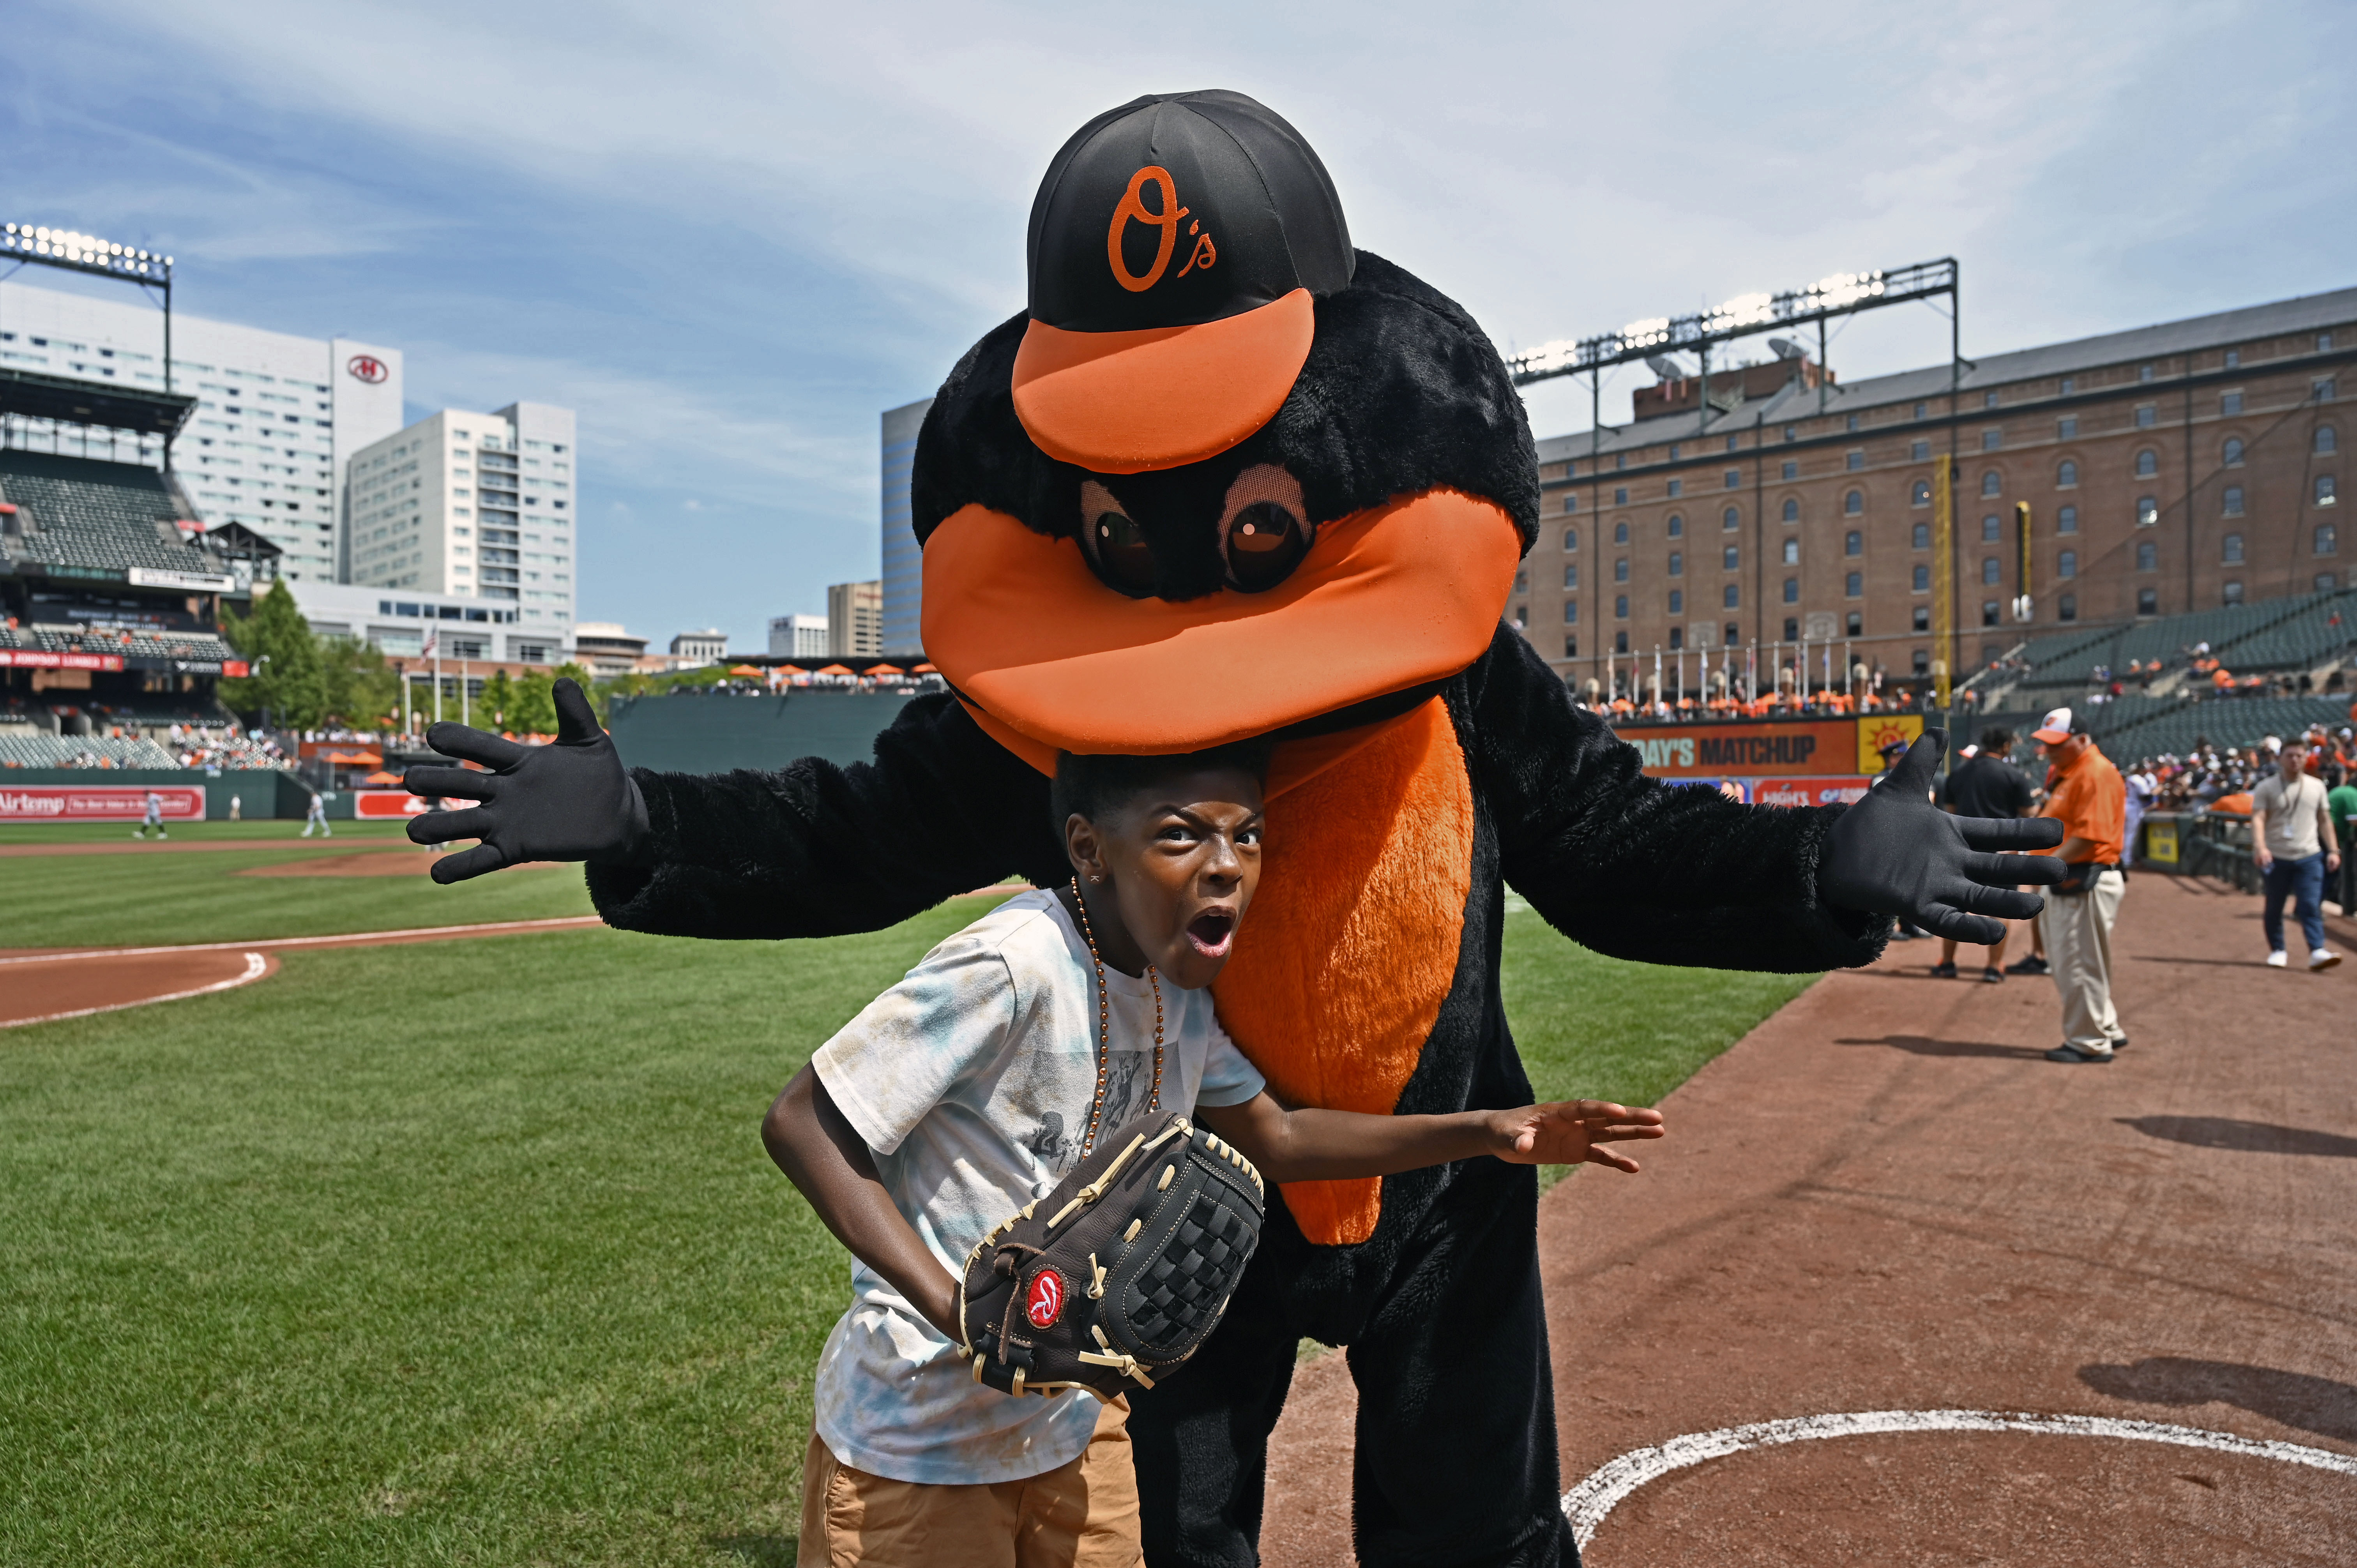 10 'guest splashers' who would make waves in the Orioles' Bird Bath